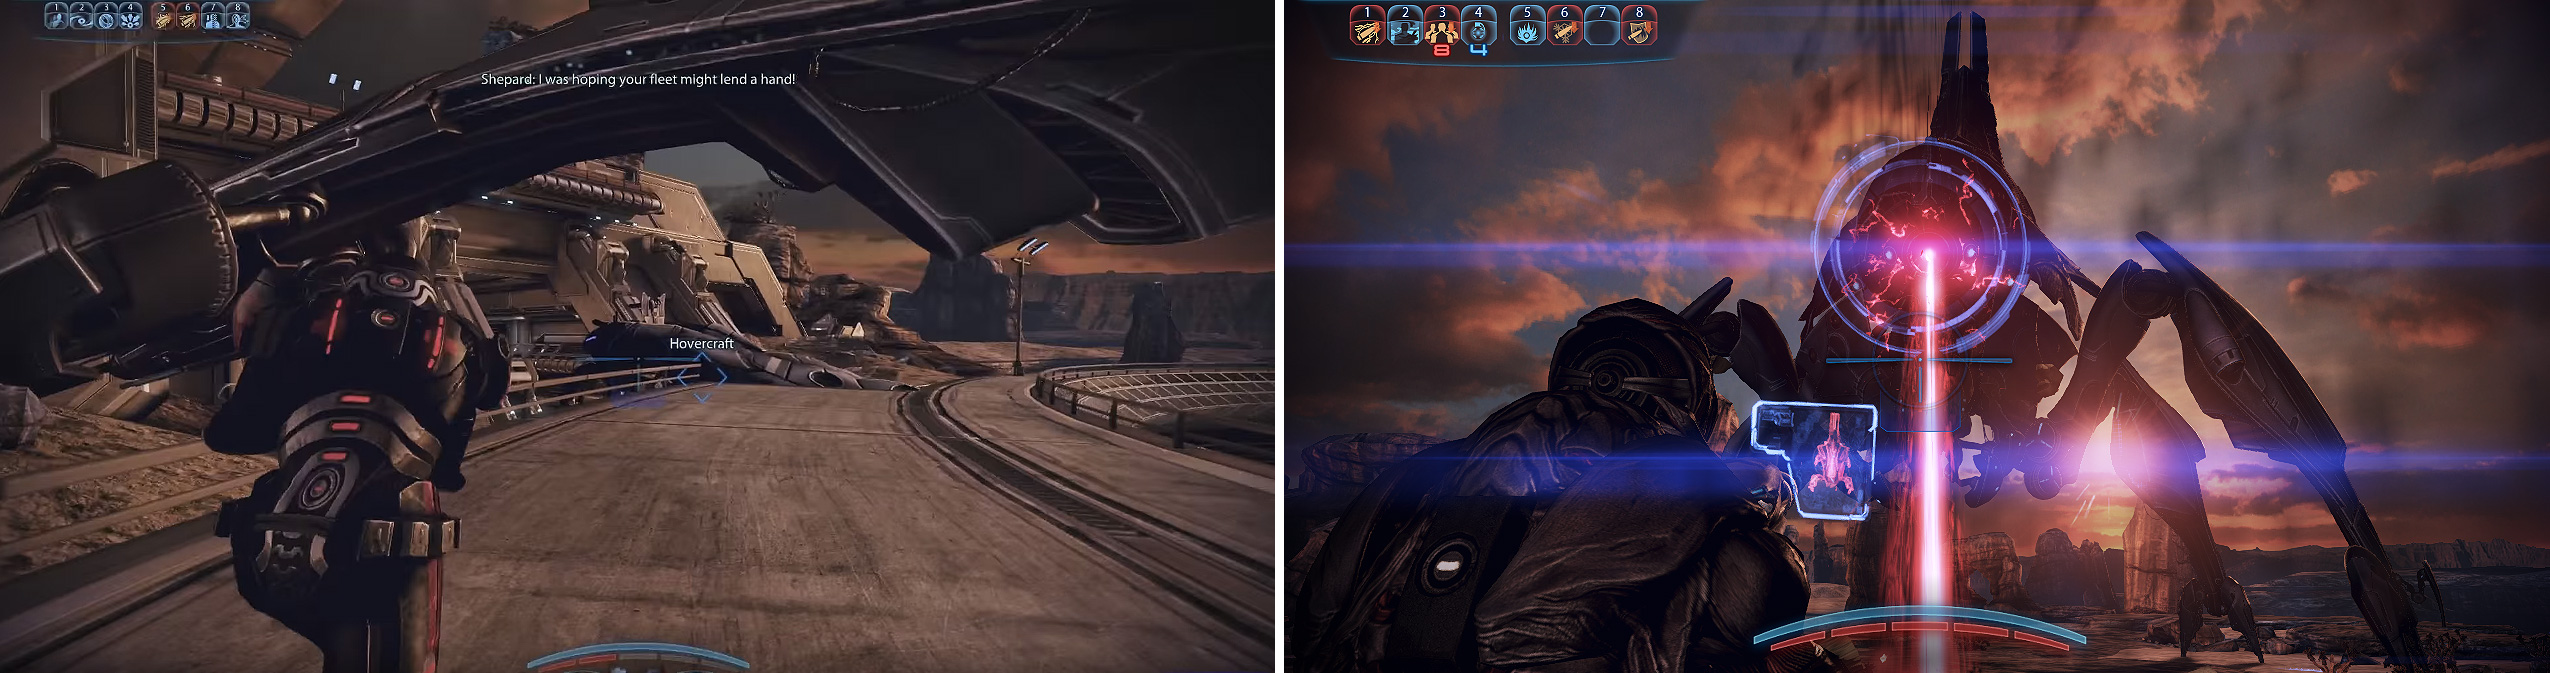 Run to the hovercraft when the Reaper appears (left). Later, dodging the laser beam can be tricky on harder difficulties so try dodging right at the last second before it hits you (right).